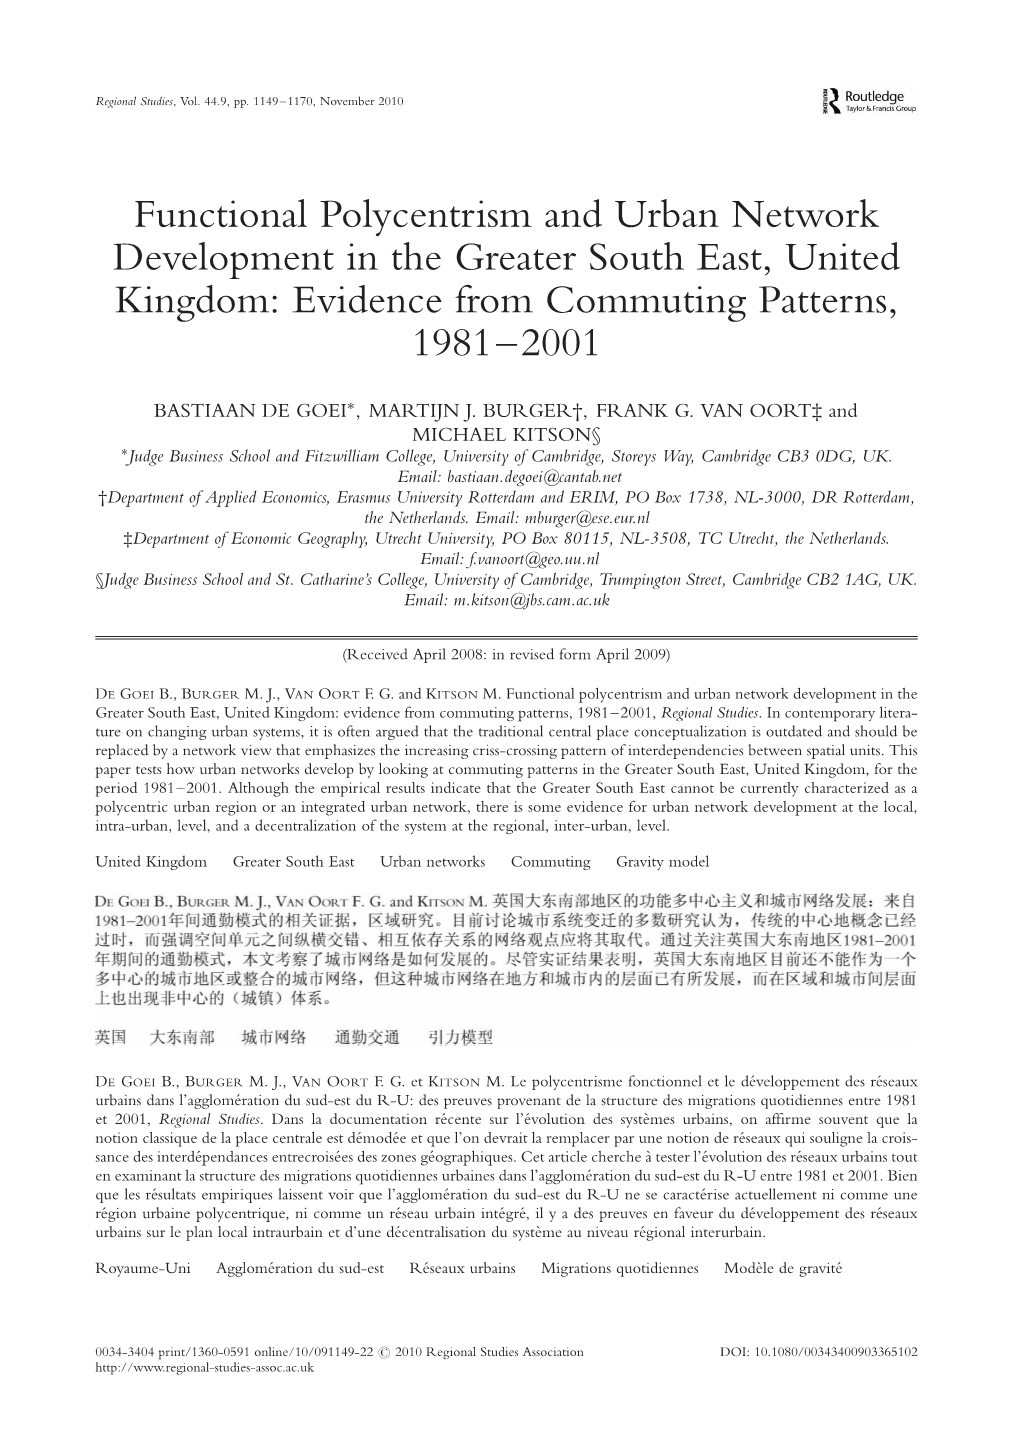 Functional Polycentrism and Urban Network Development in the Greater South East, United Kingdom: Evidence from Commuting Patterns, 1981–2001